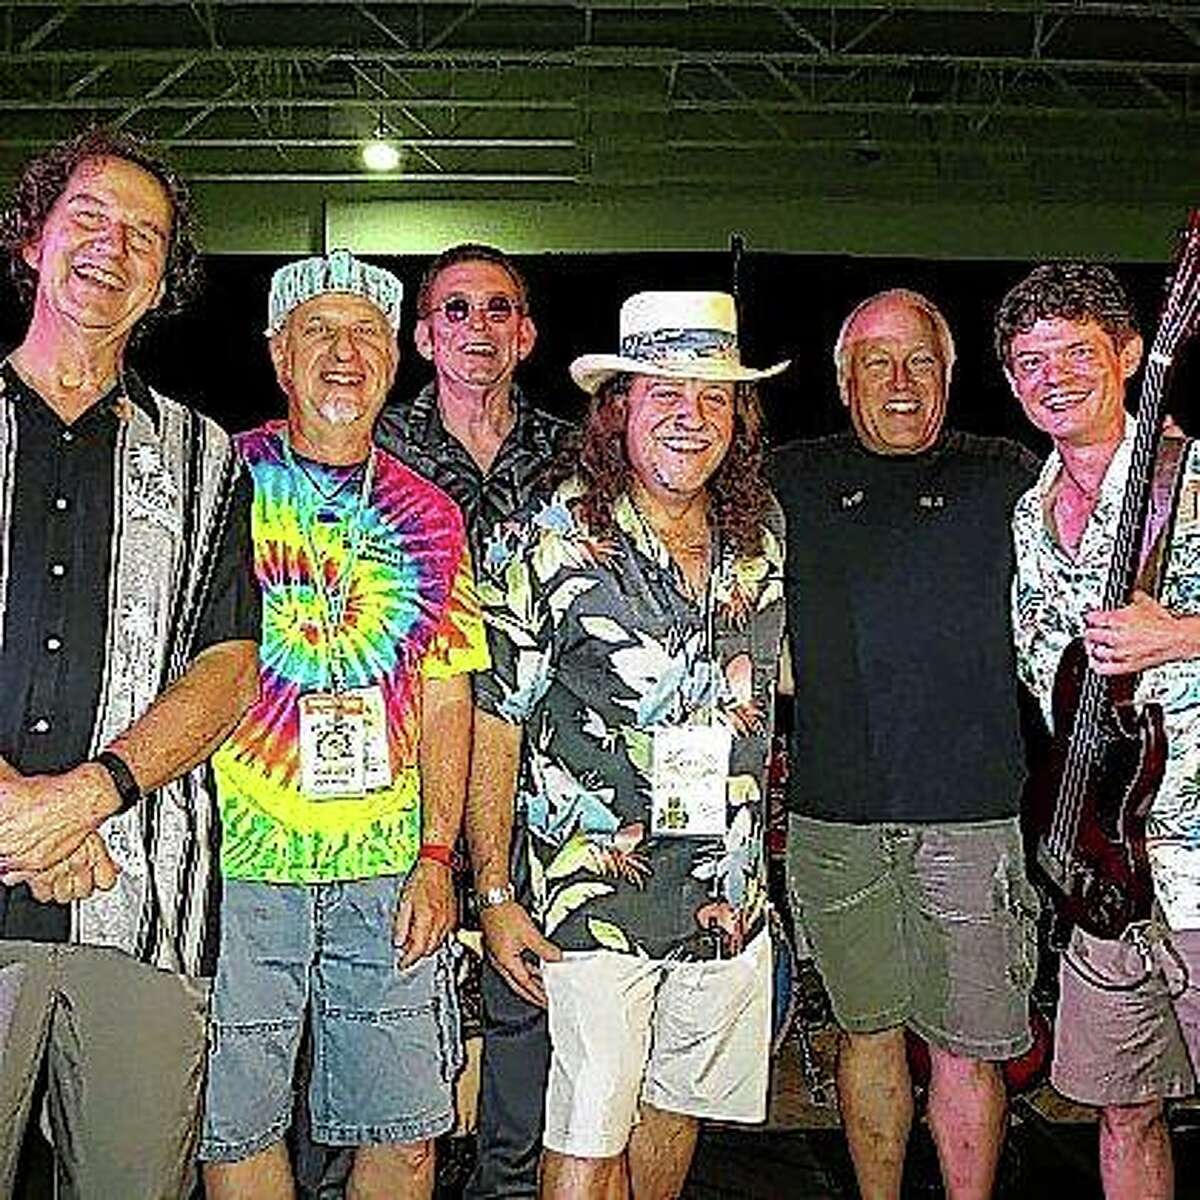 The Boat Drunks, a Champaign-based band that started as a Jimmy Buffett cover band before gaining an international fan base and attention from Buffett himself, will perform Thursday at the Morgan County Fair as part of the fair’s Parrot Head Night.